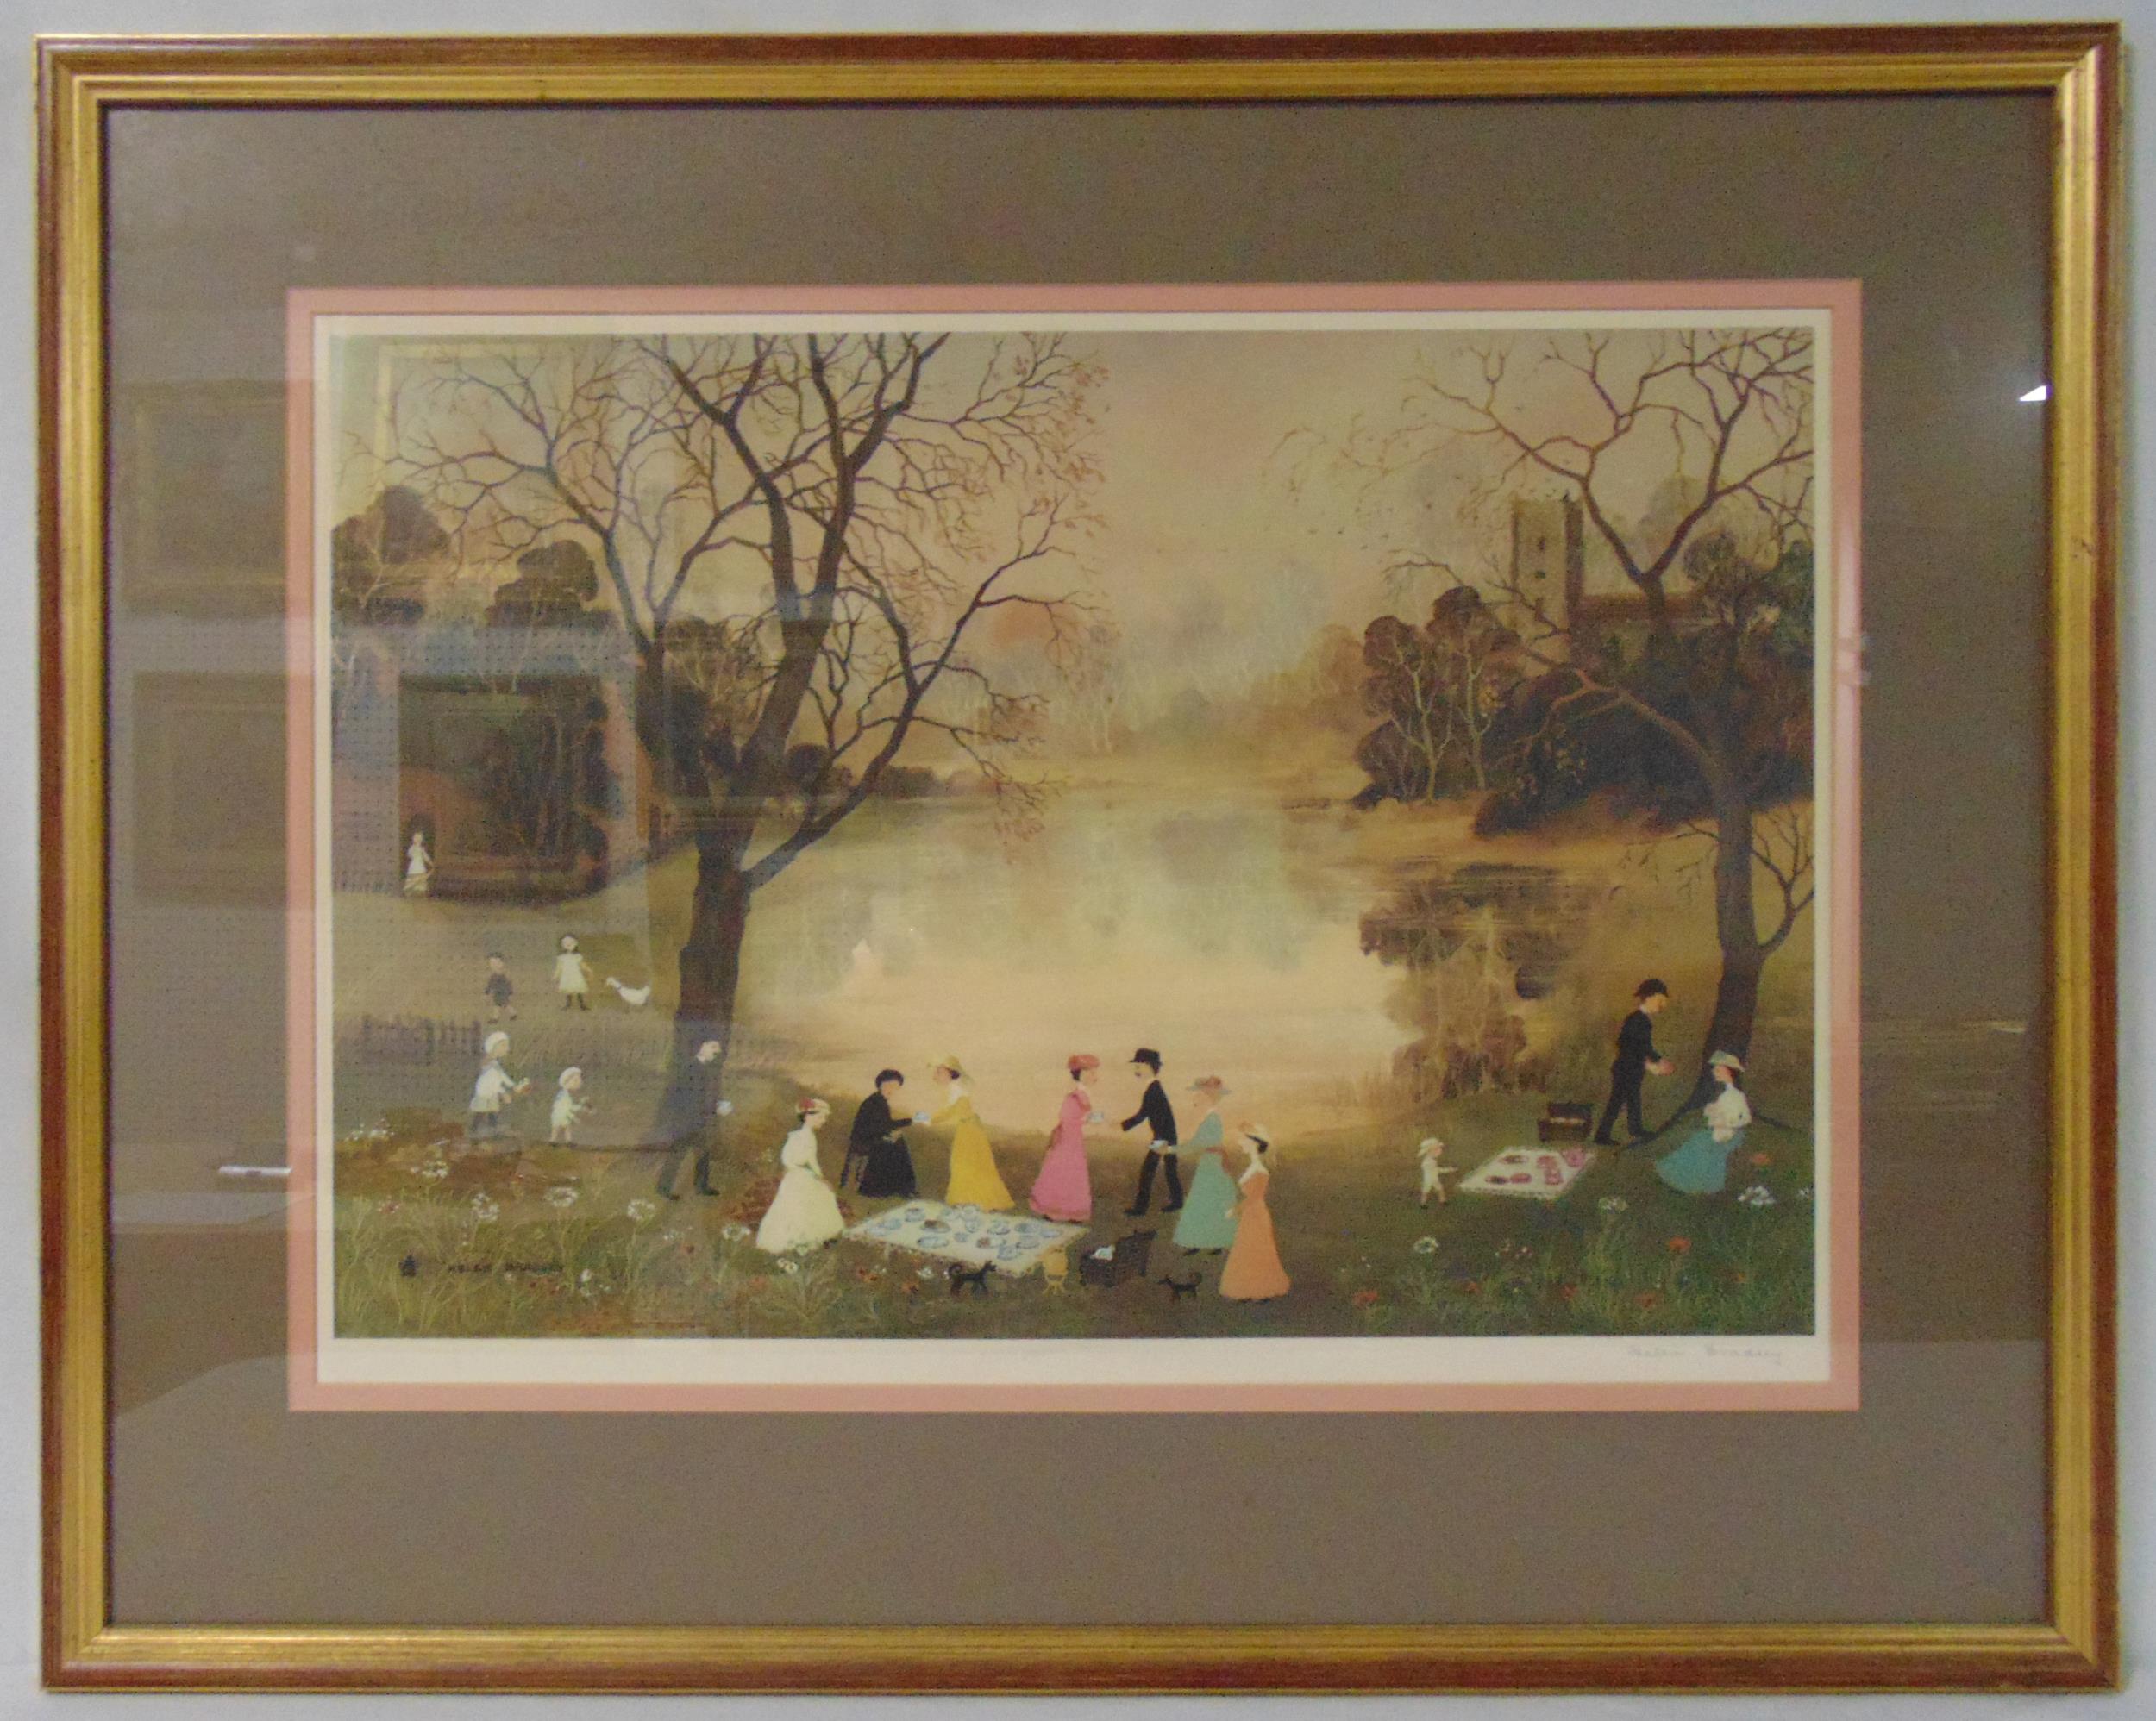 Helen Bradley framed and glazed polychromatic lithograph of figures in a park, signed bottom right